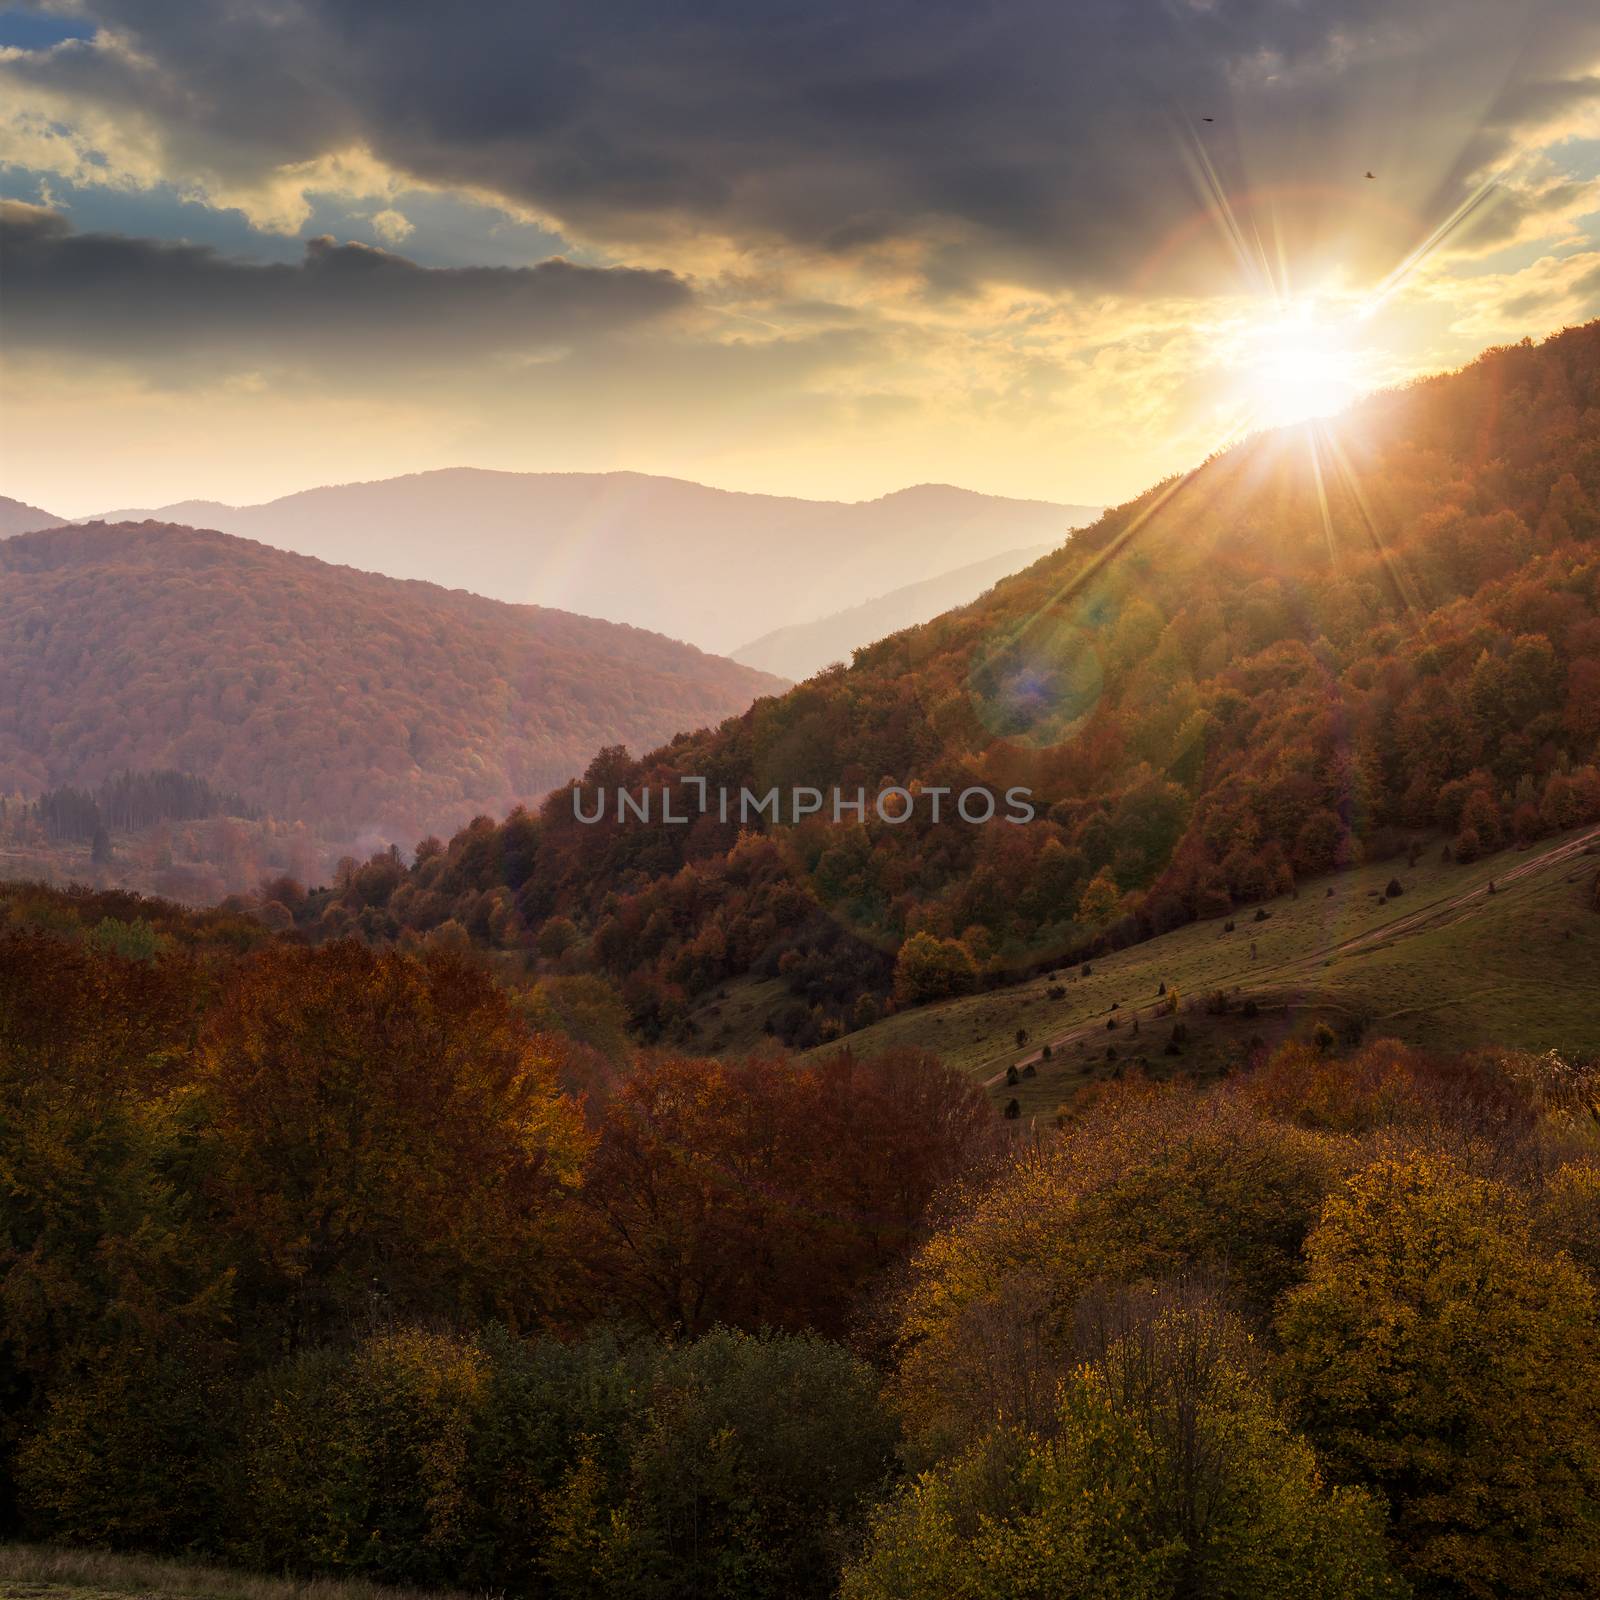 slope of mountain range with autumn forest and foliage in sunset light